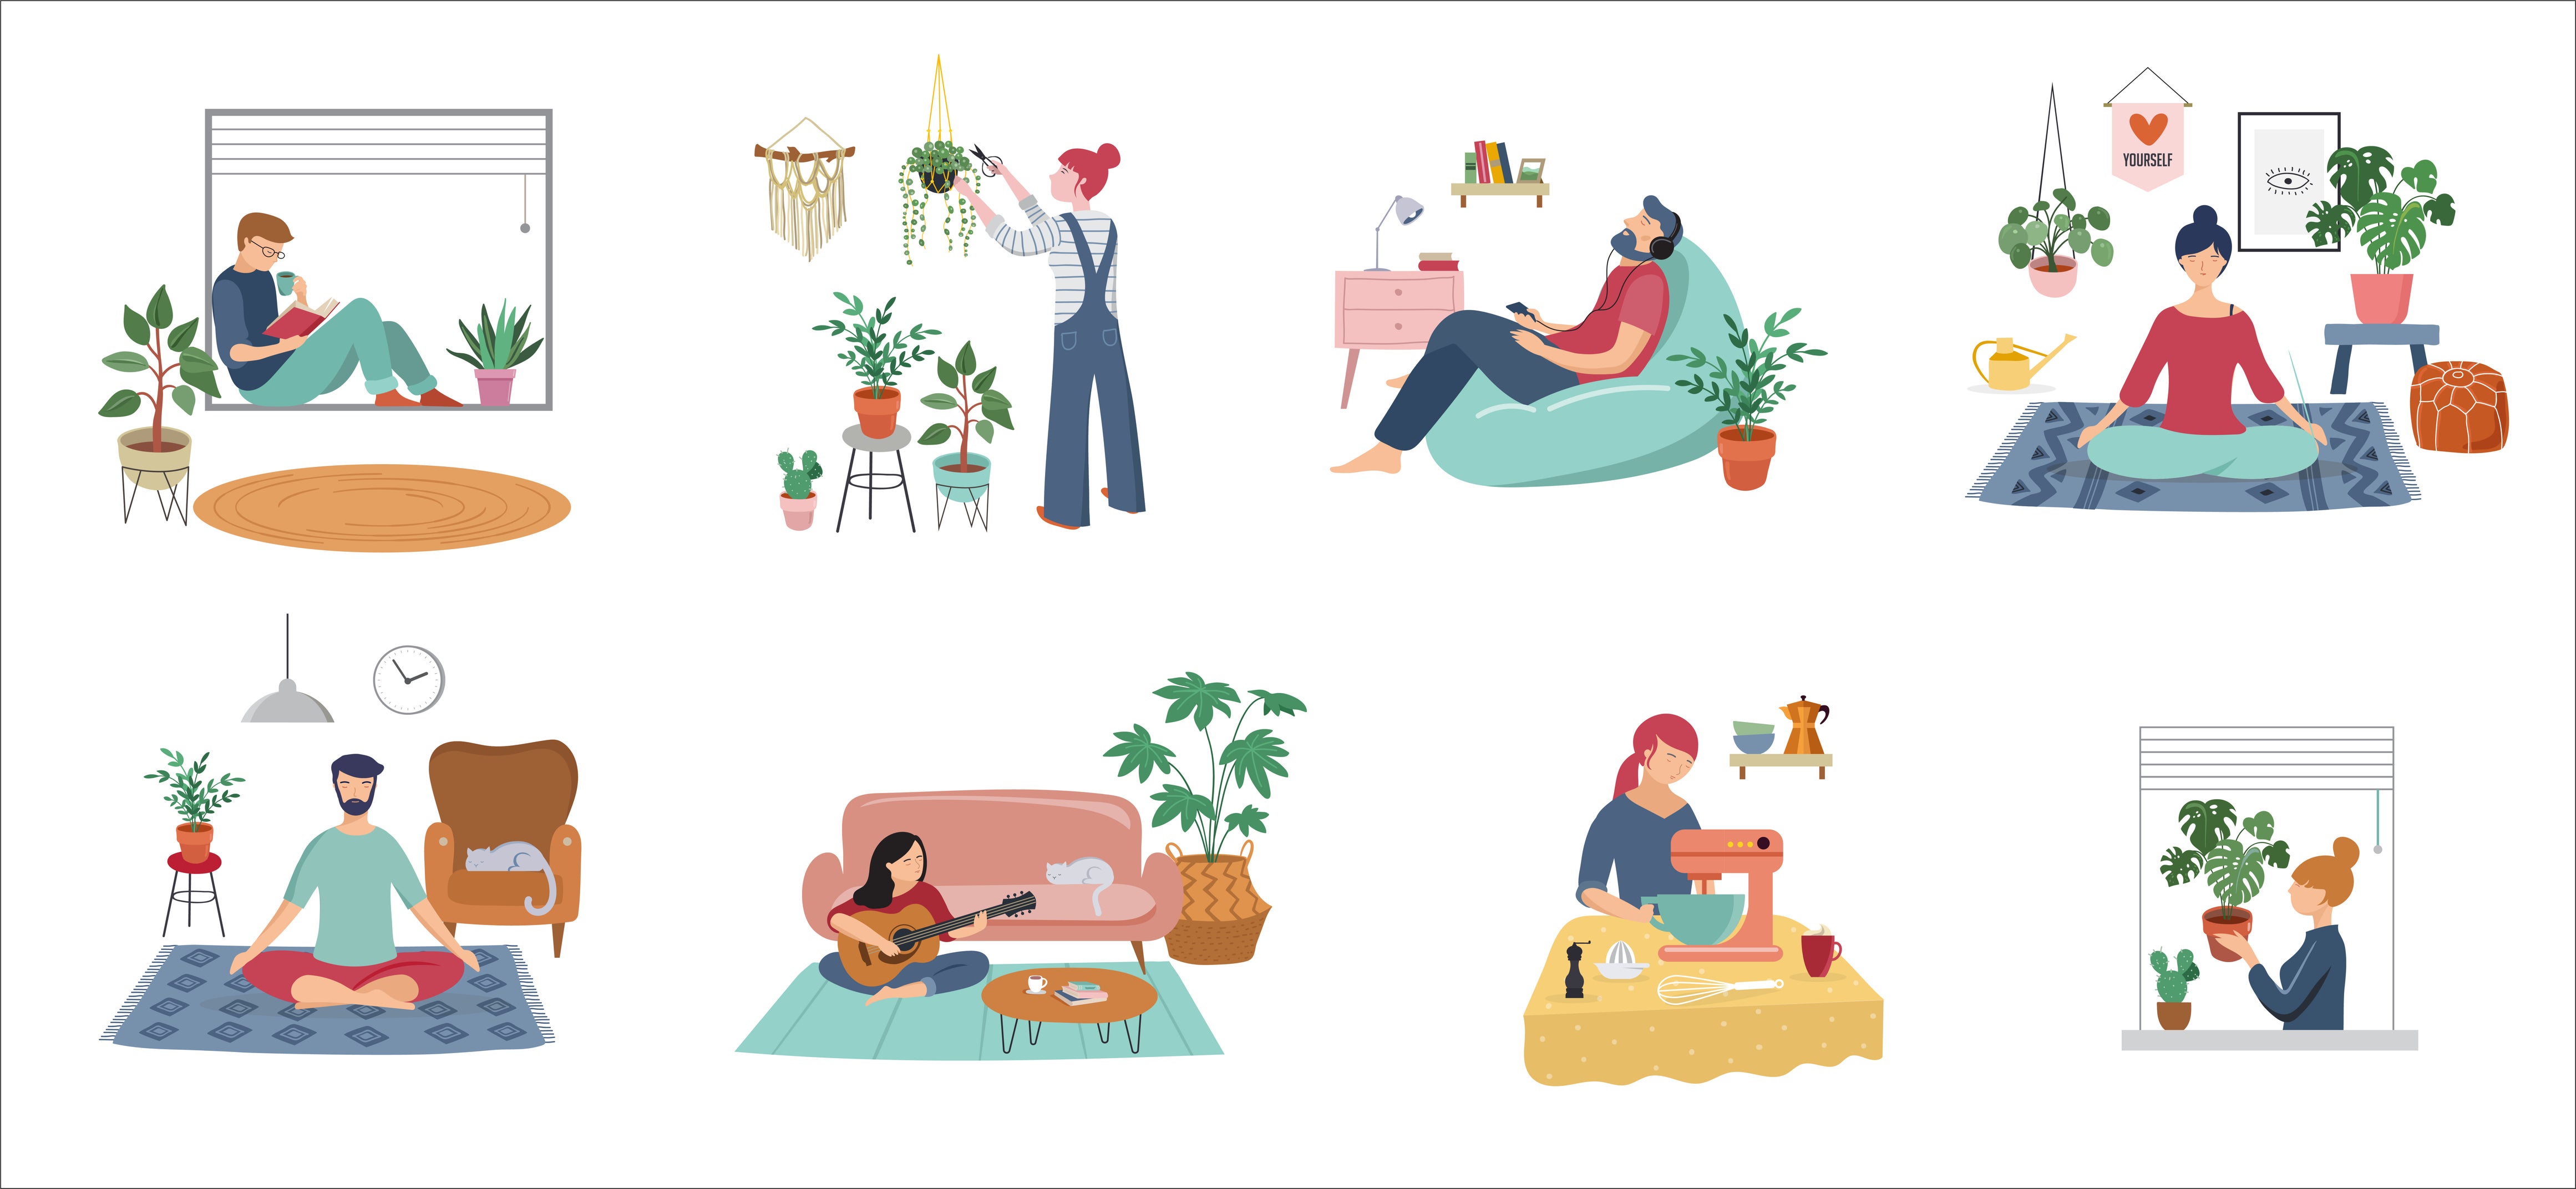 Illustrated image of people relaxing at home doing various activities